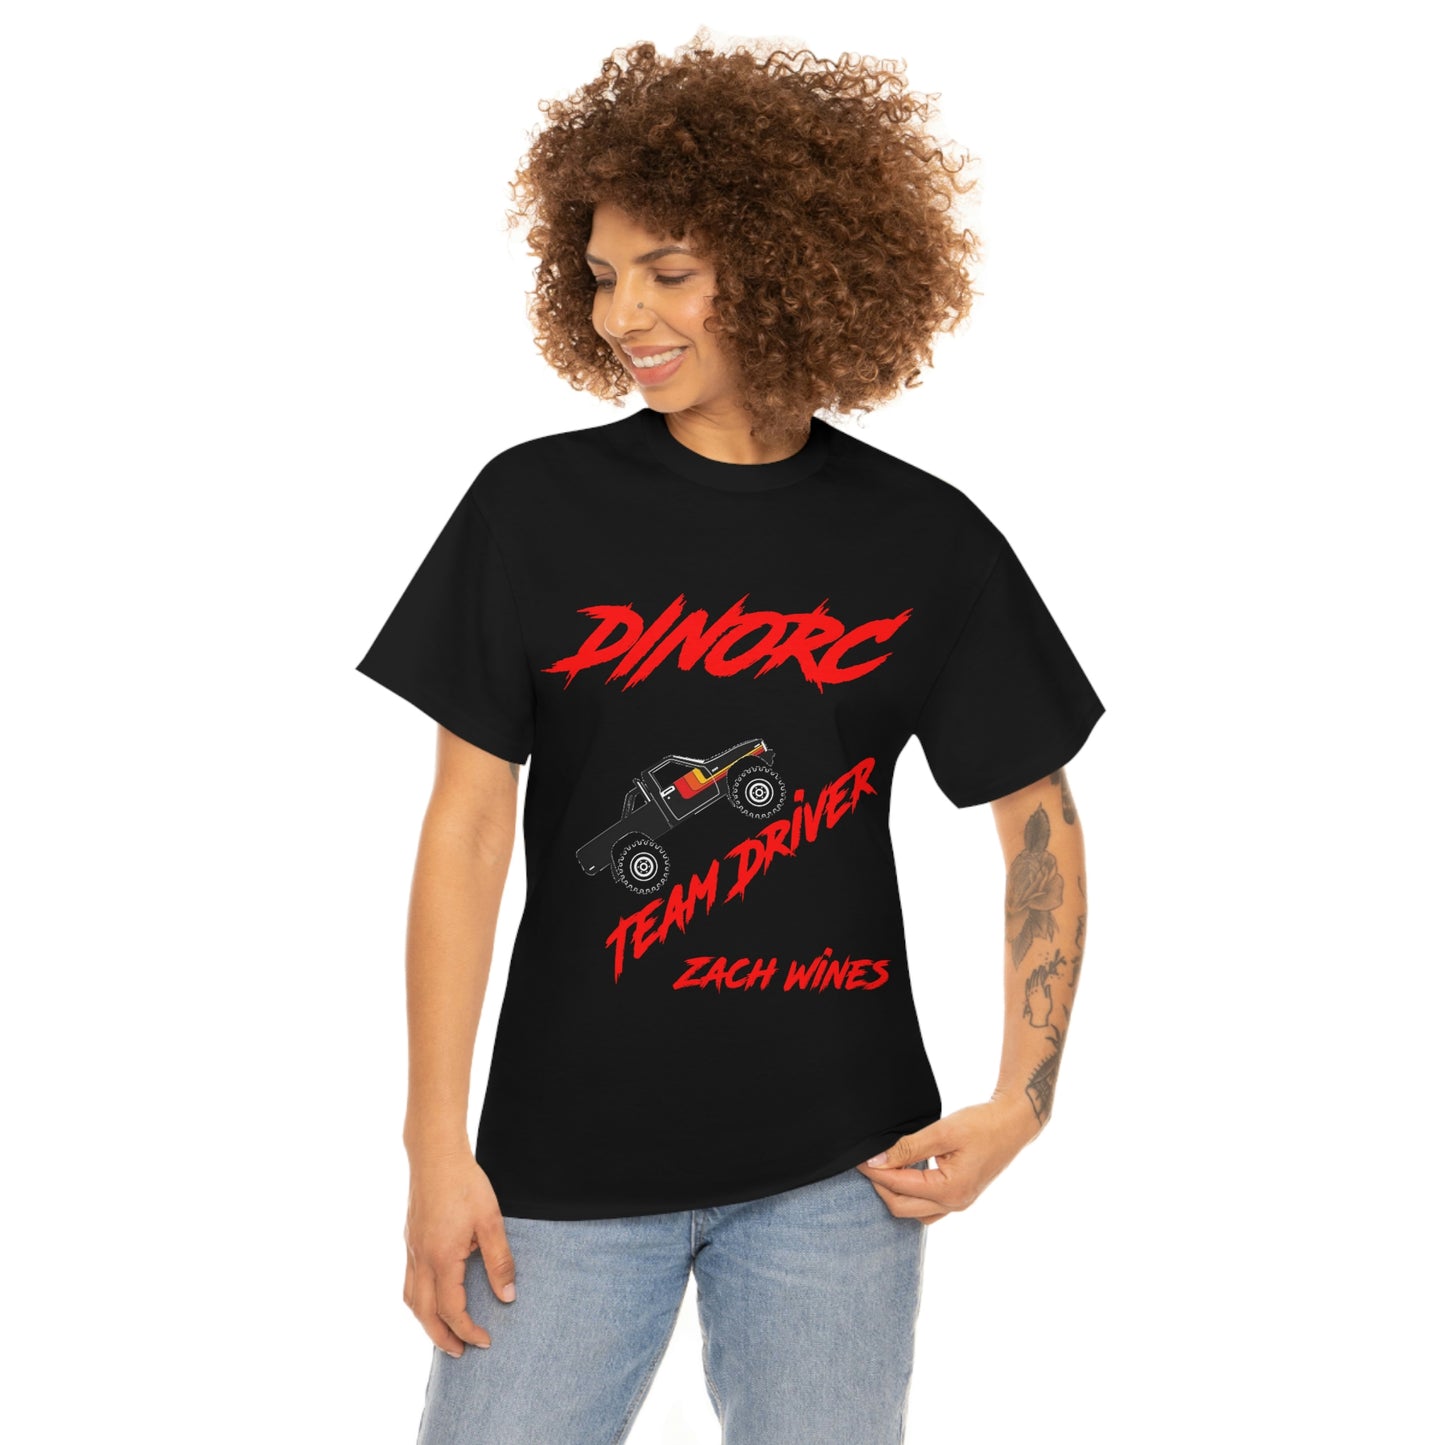 Zach Wines  DinoRC Team Driver truck logo Front and Back DinoRc Logo T-Shirt S-5x 5 colors